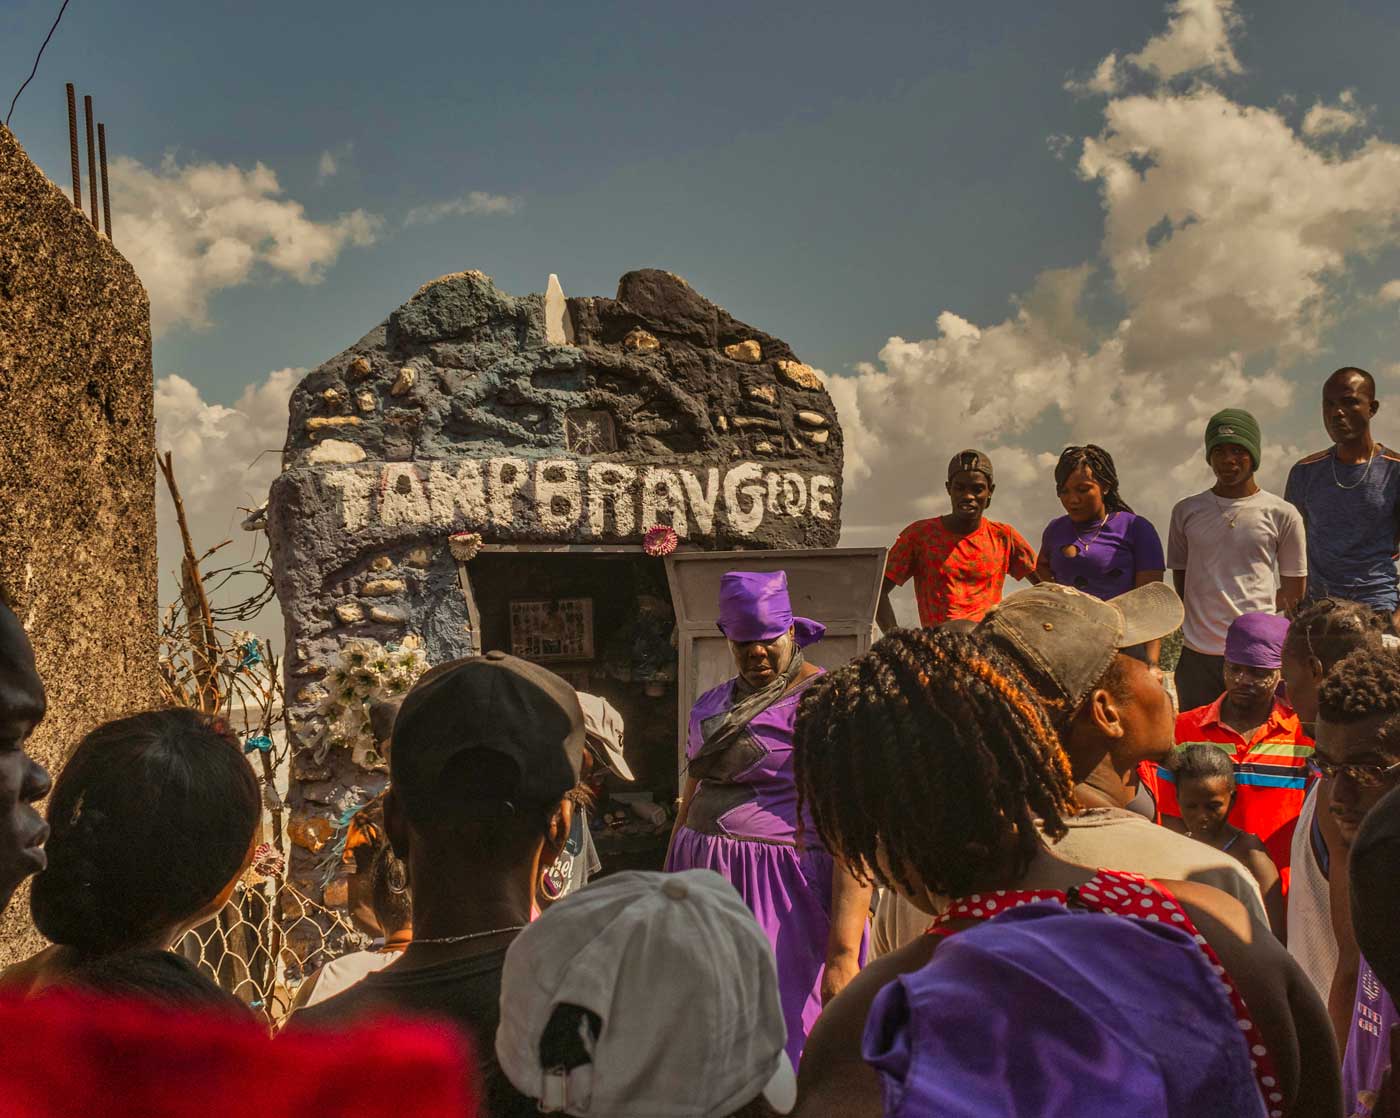 haitians gathered at cemetery for fet gede vodou ritual